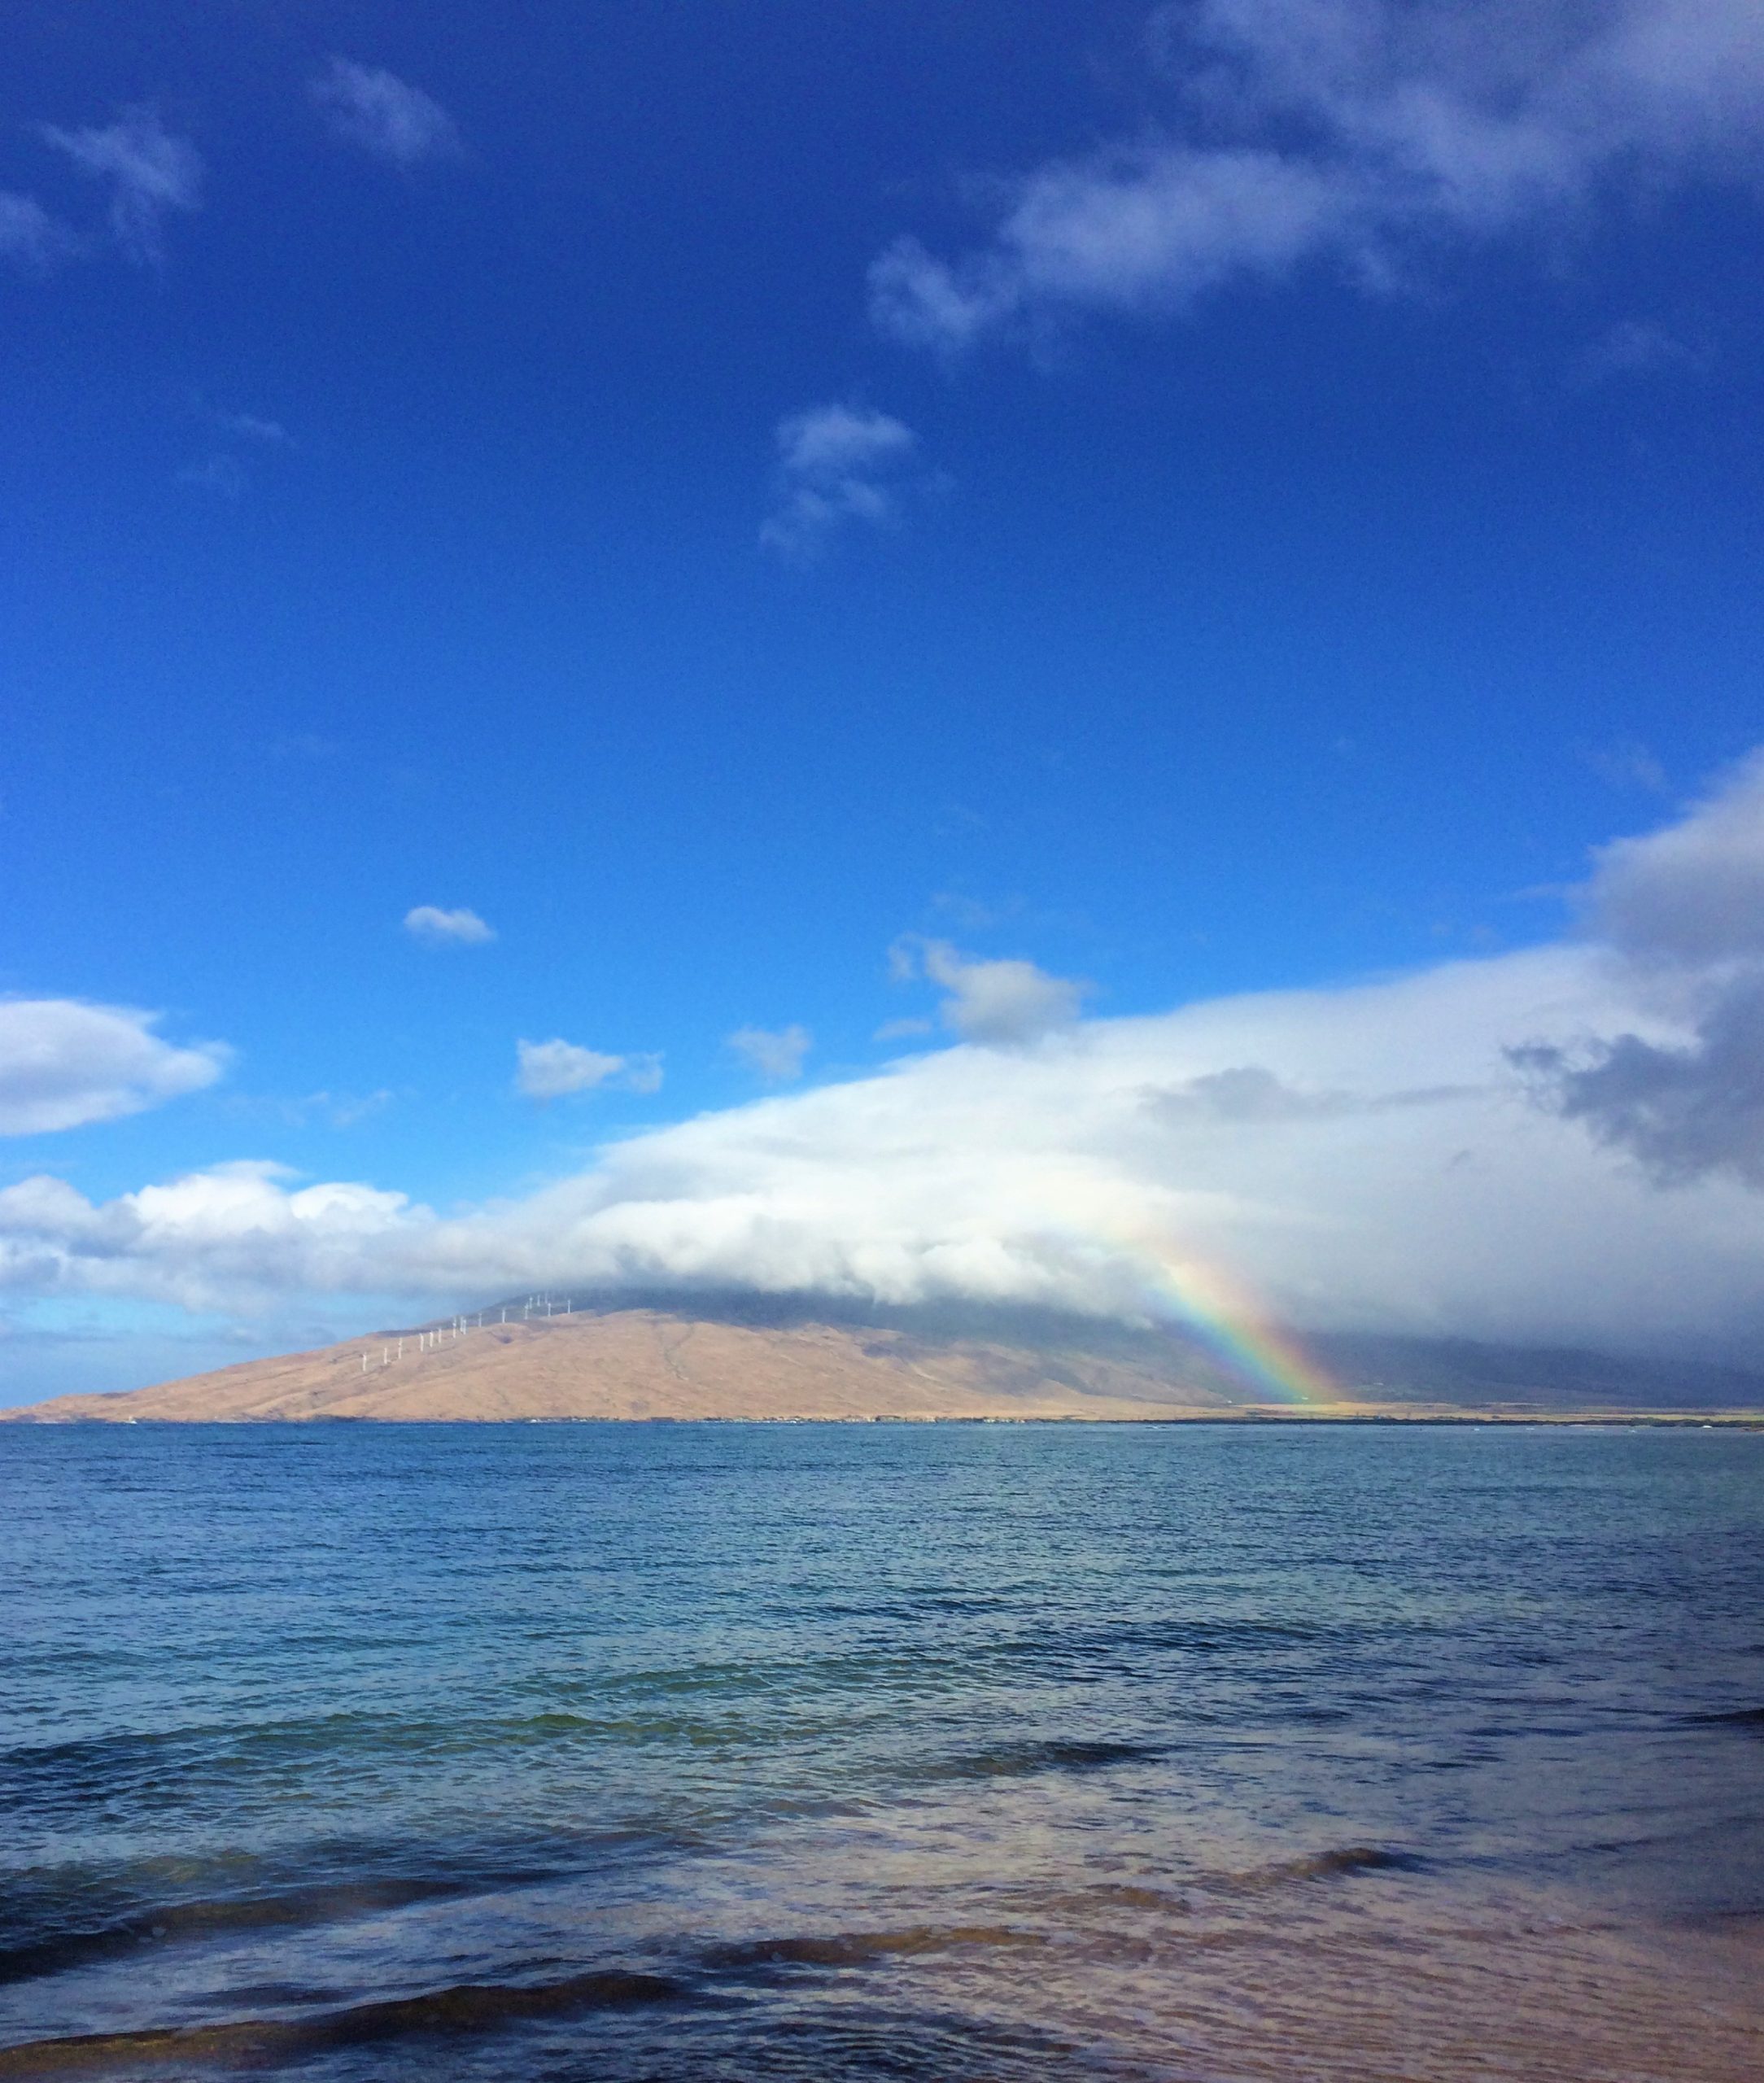 Maui Ocean Center is literally at the end of this rainbow!